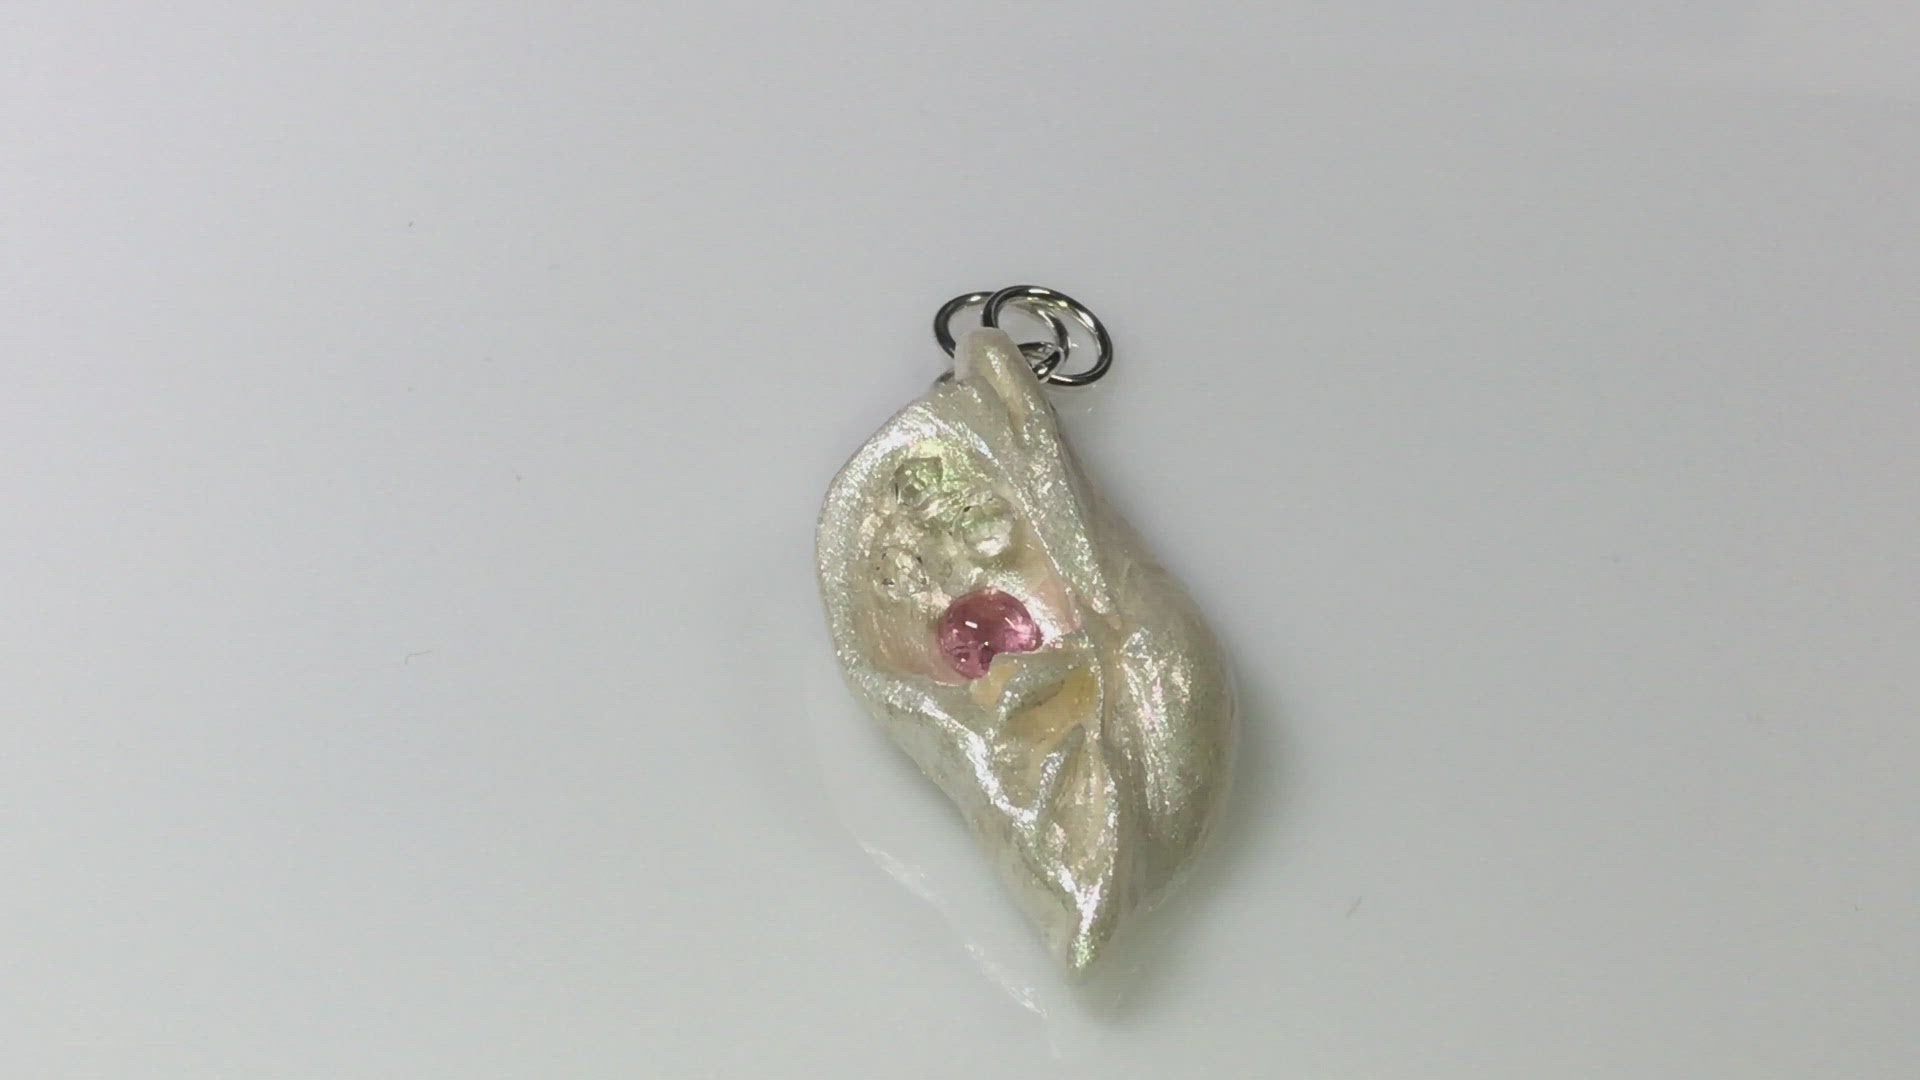 A video This natural seashell pendant has Pink Tourmaline gemstone and three Herkimer Diamonds that compliments the pendant.